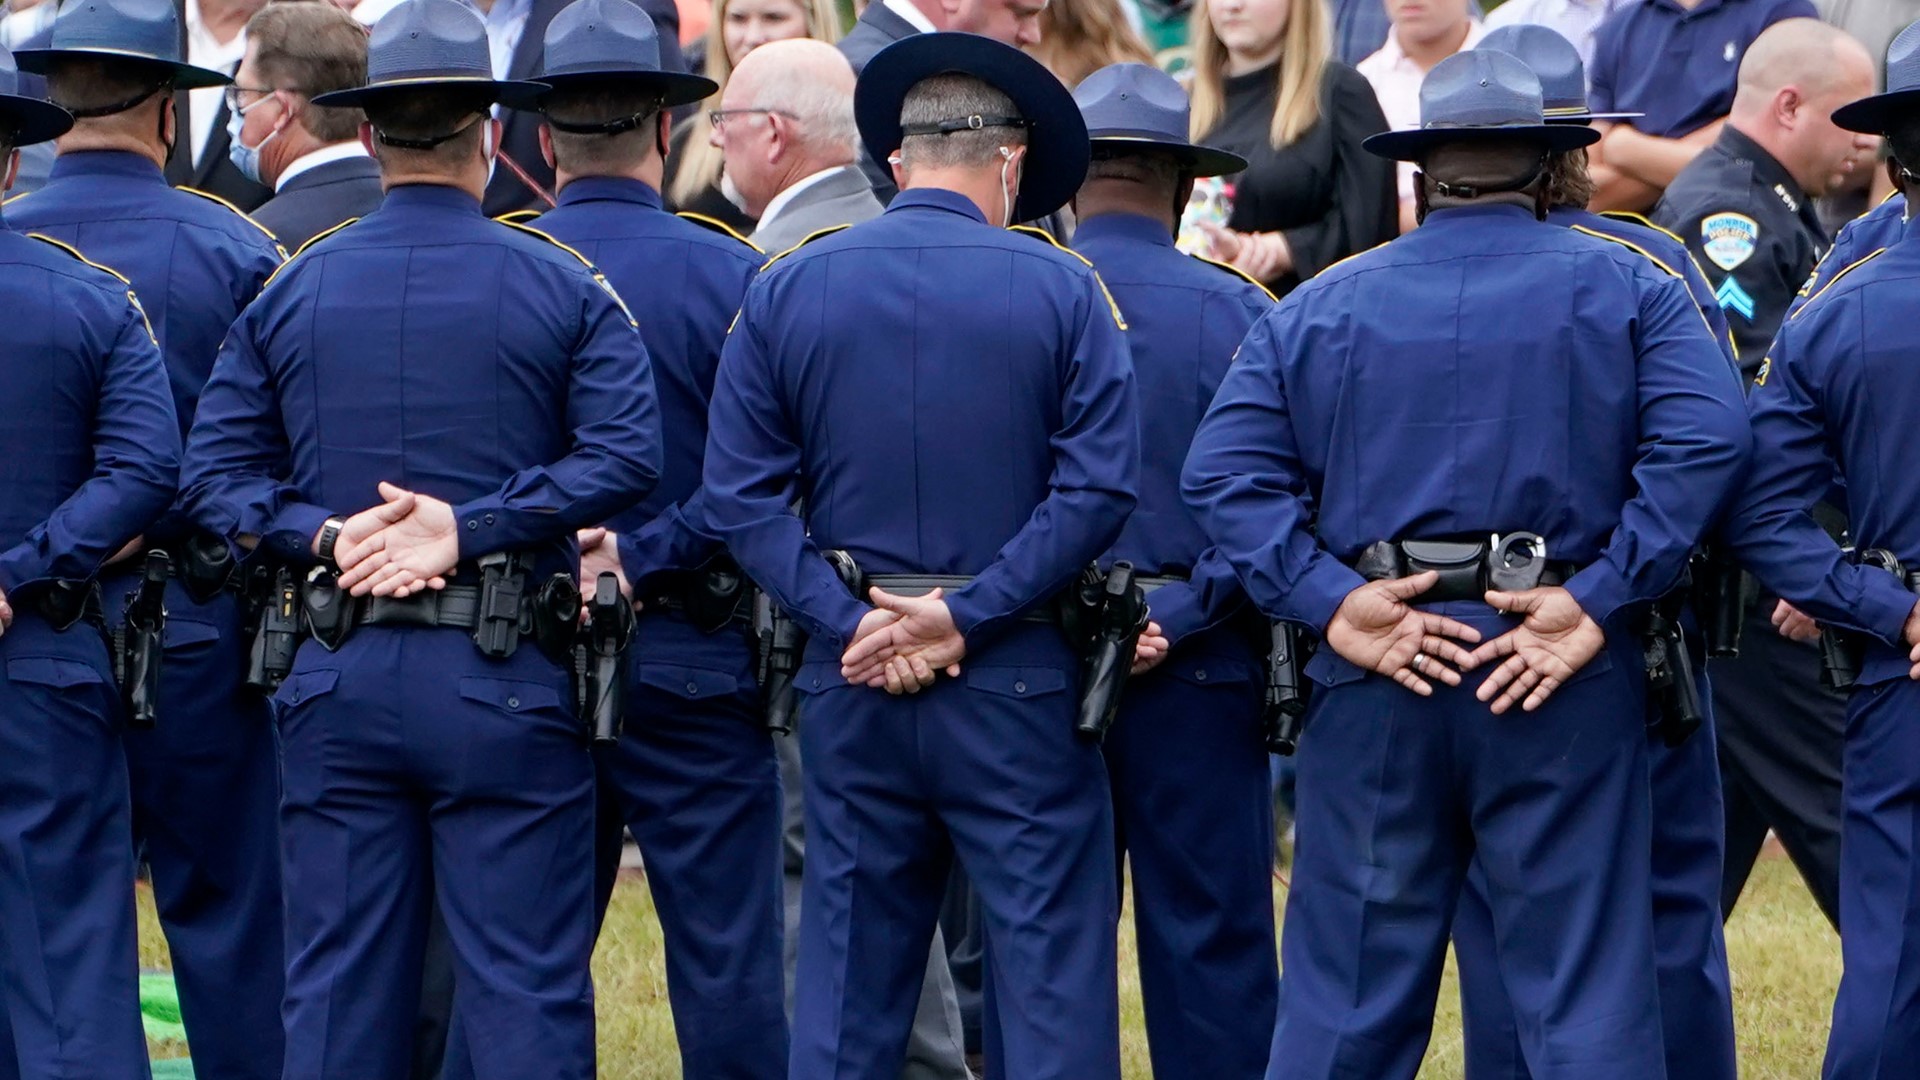 Dozens of current and former troopers tell The Associated Press of a culture at the Louisiana State Police of impunity, nepotism, and in some cases outright racism.